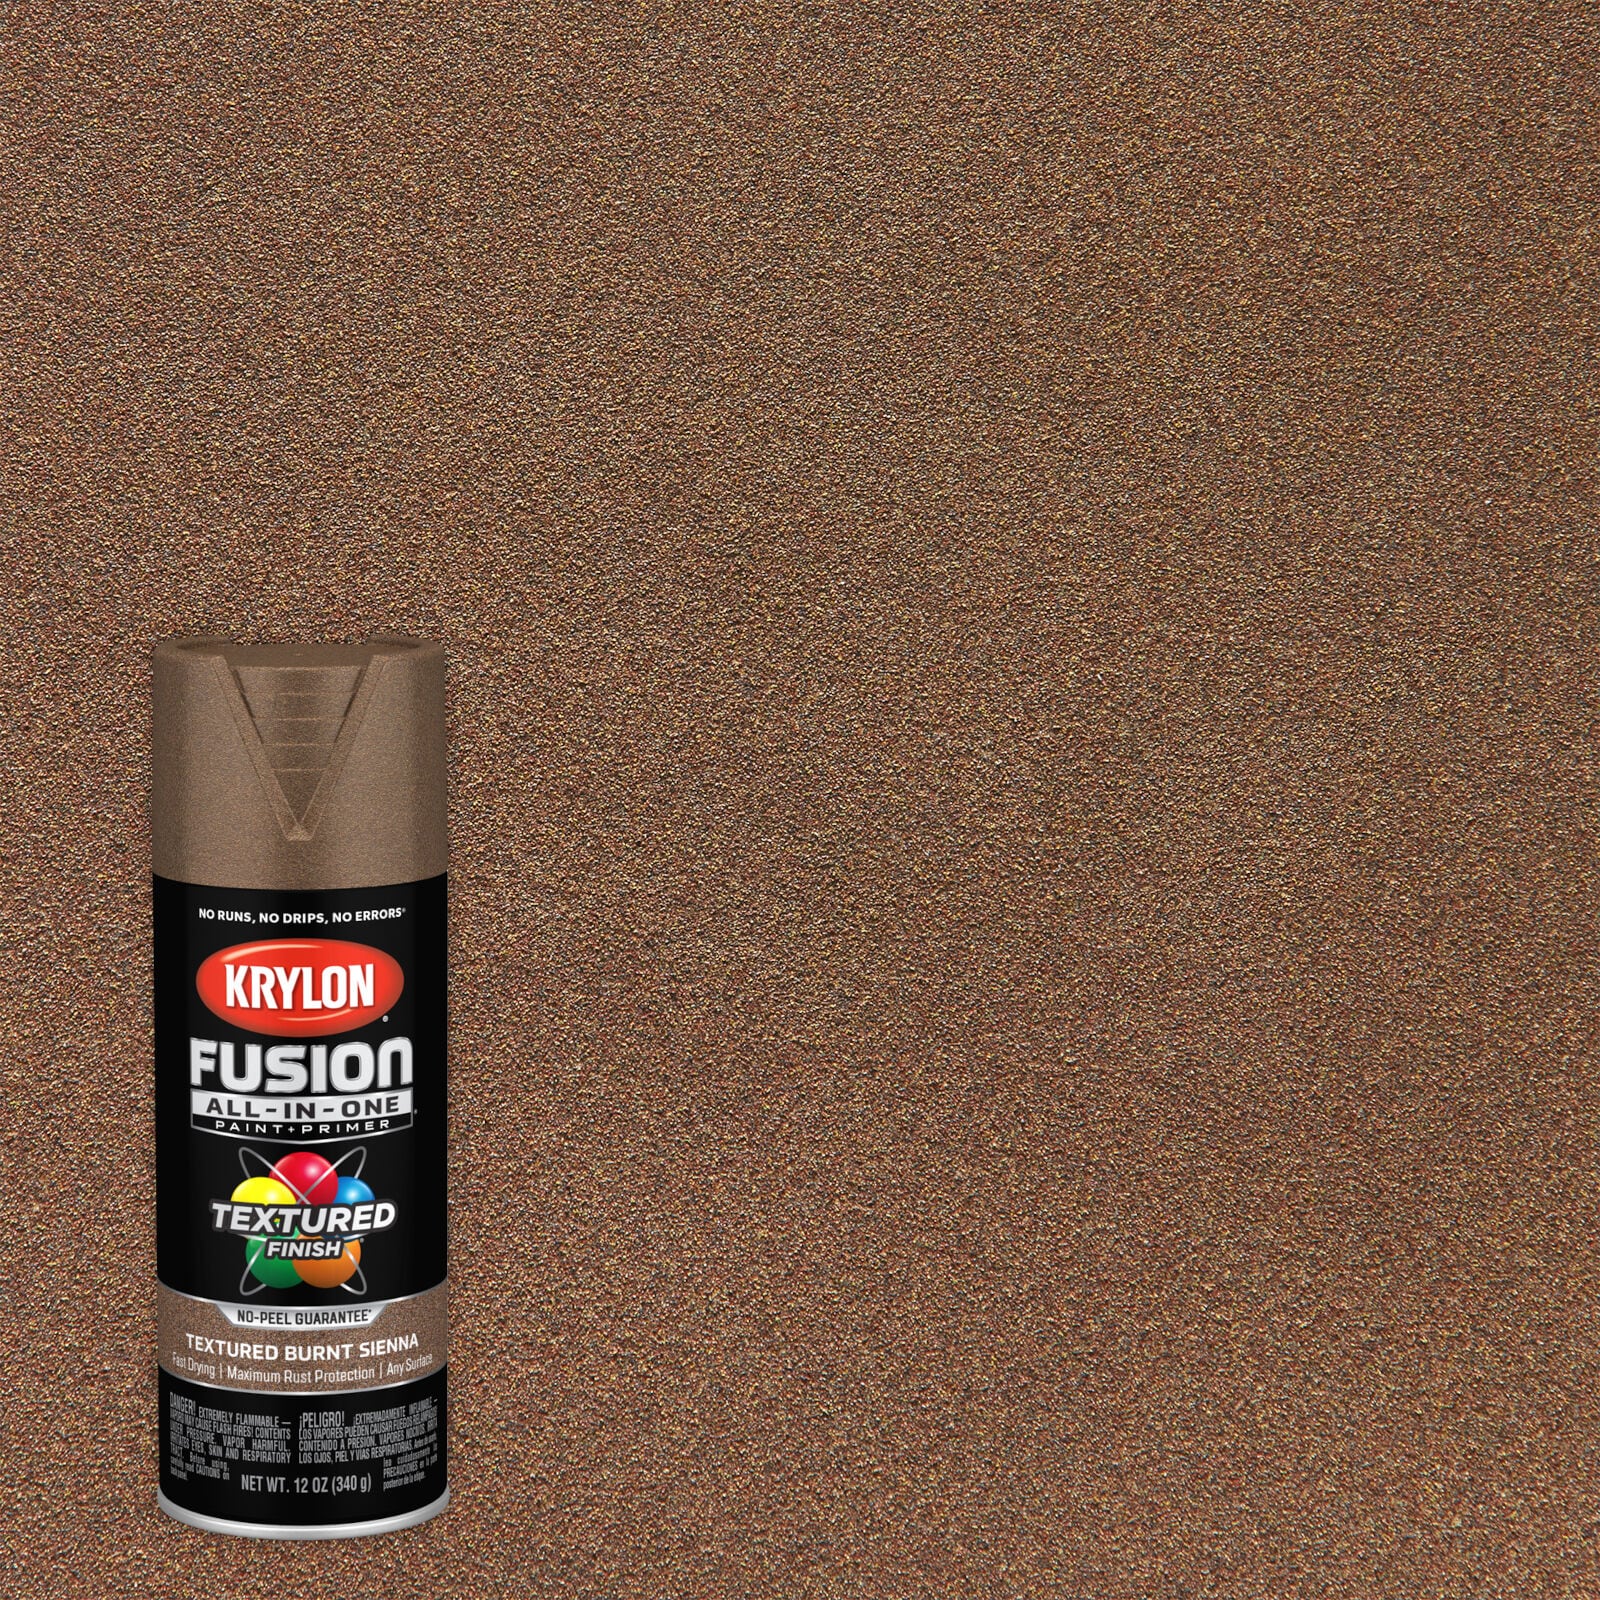 Acrylic Paint, 16 oz, Shades of Brown, Sienna, Umber, Certified Non Toxic  Acrylic Art Paint